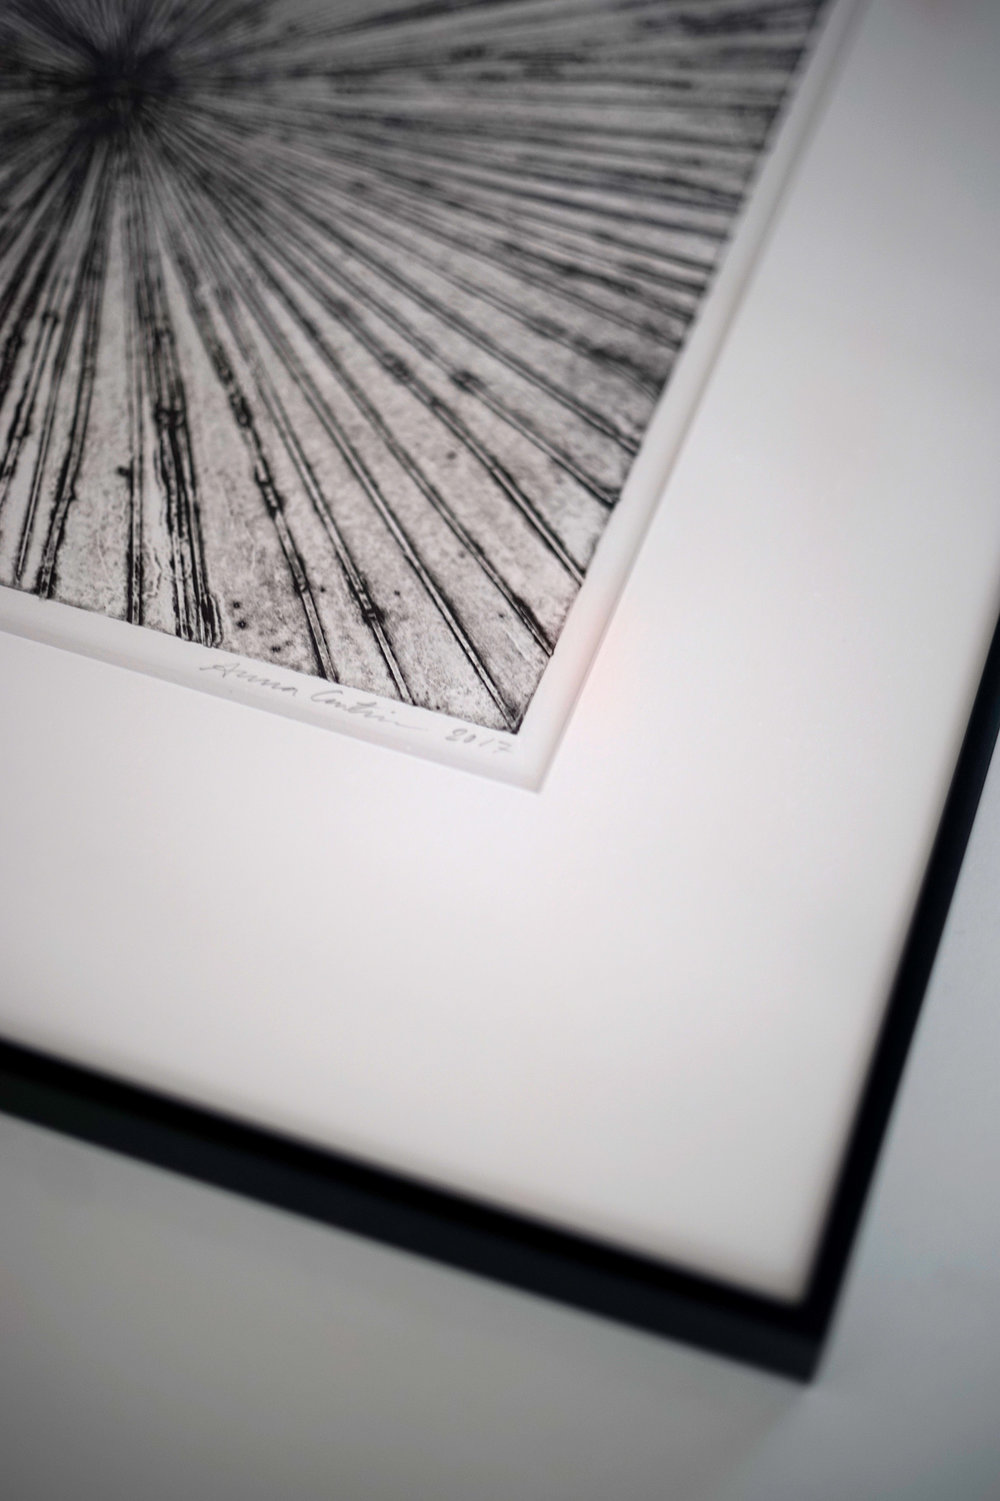 Print framed with white passepartout